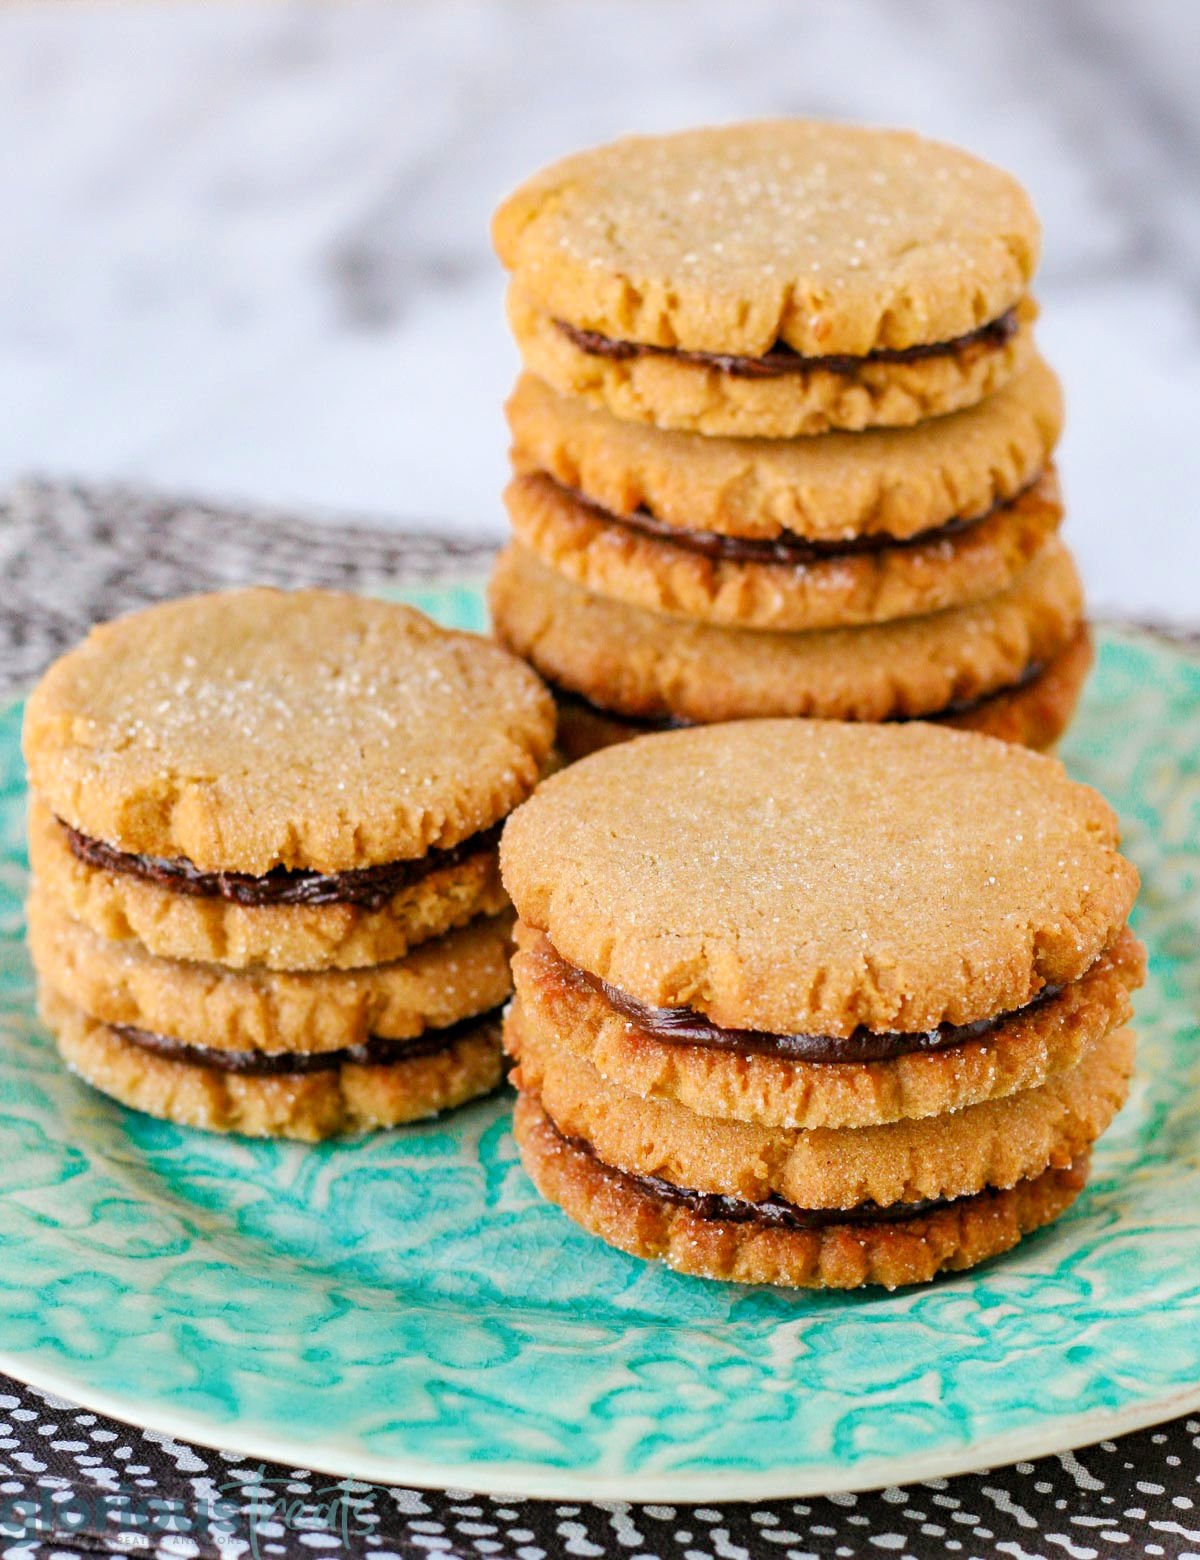 three stacks of peanut butter cookie sandwiches with chocolate ganache filling.